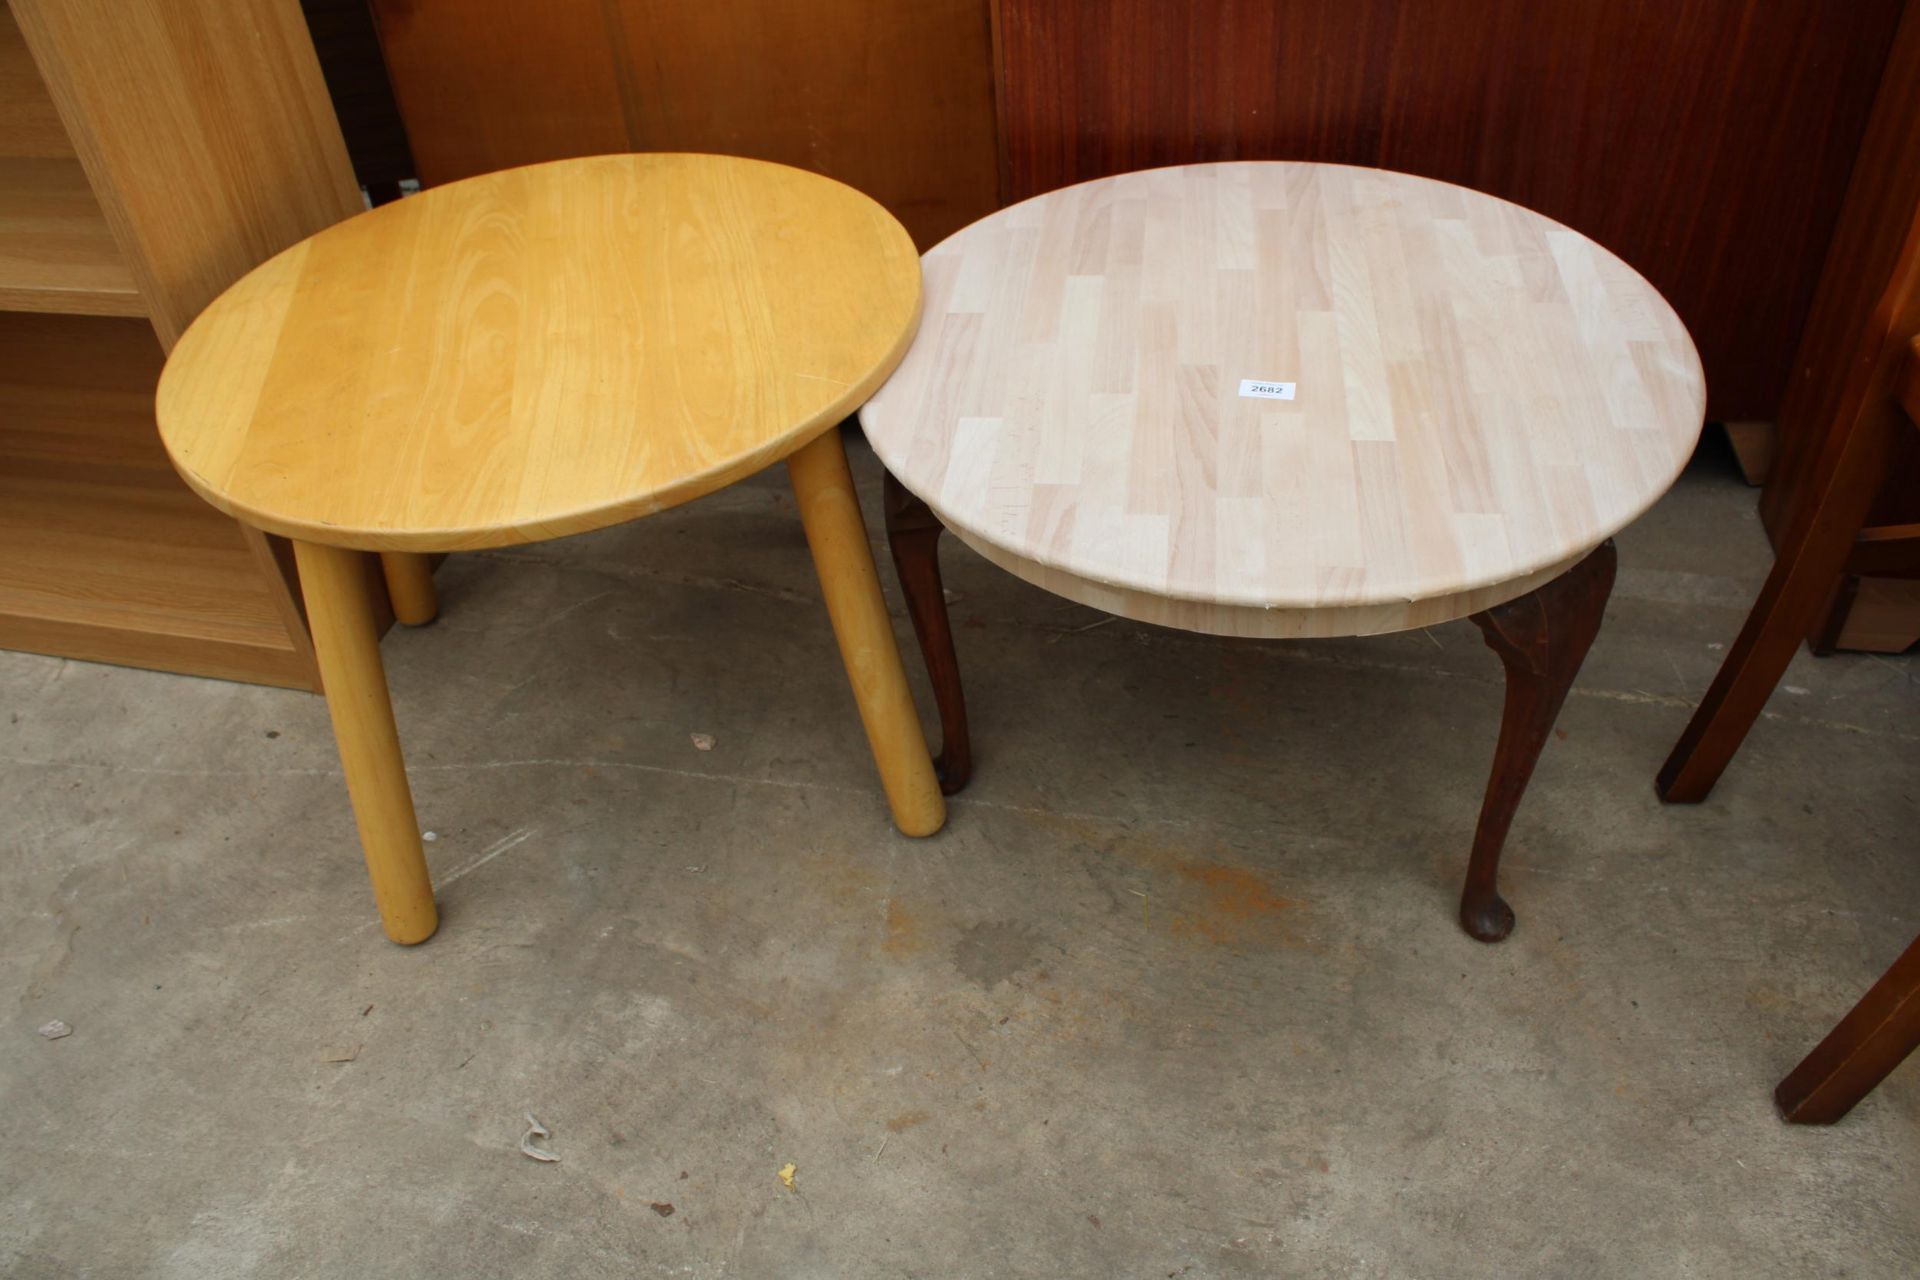 A PIN FURNITURE HARDWOOD COFFEE TABLE 24" DIAMETER AND A FURTHER TABLE ON CABRIOLE LEGS